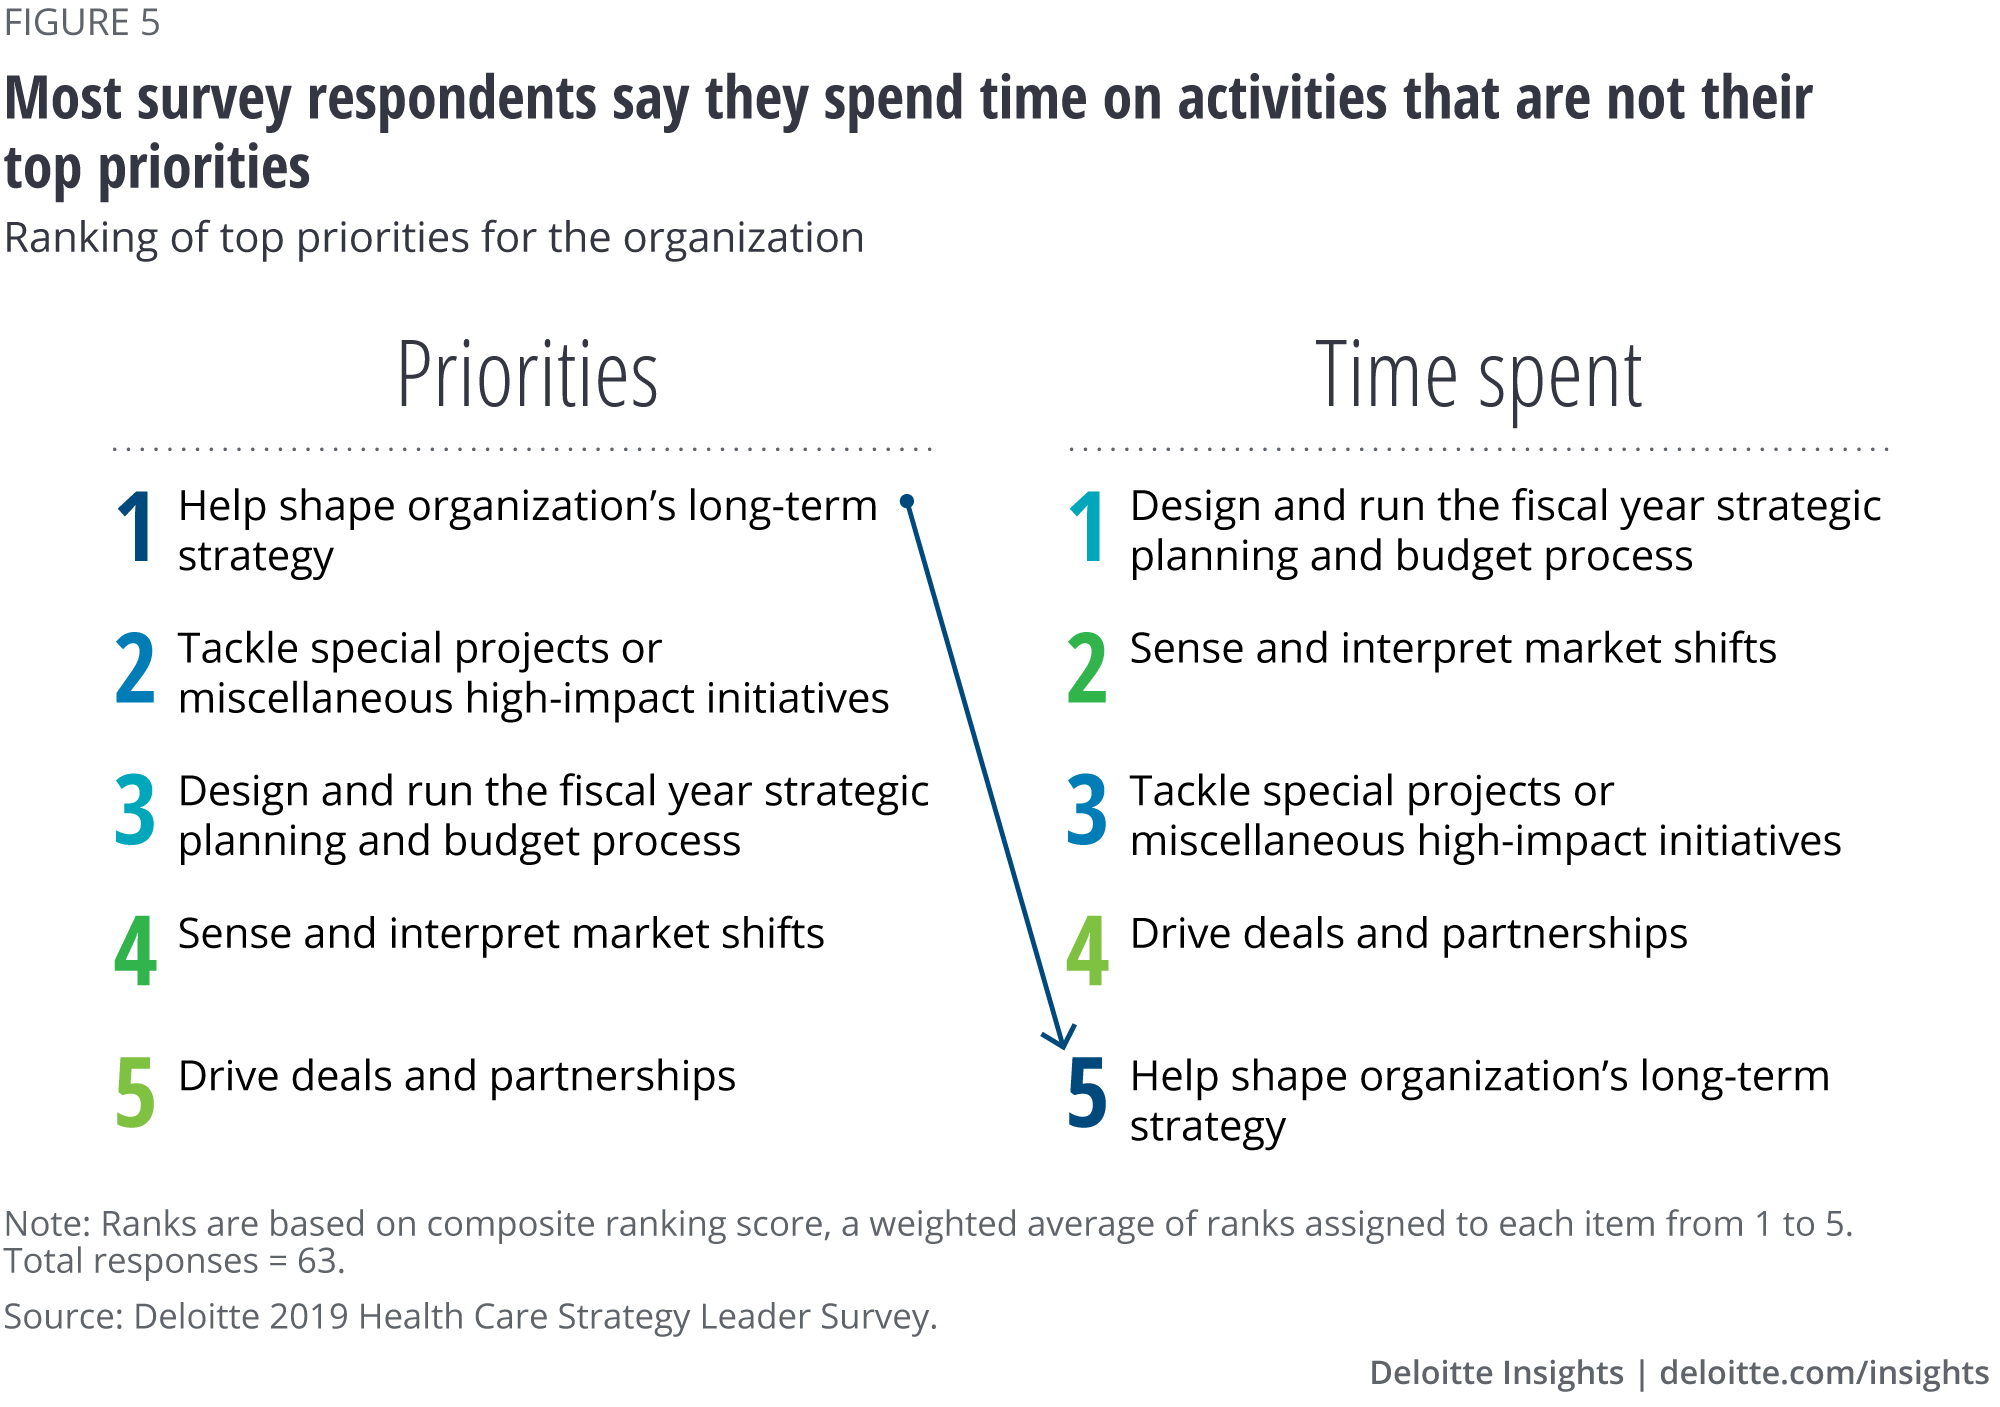 Most survey respondents say they spend time on activities that are not their top priorities